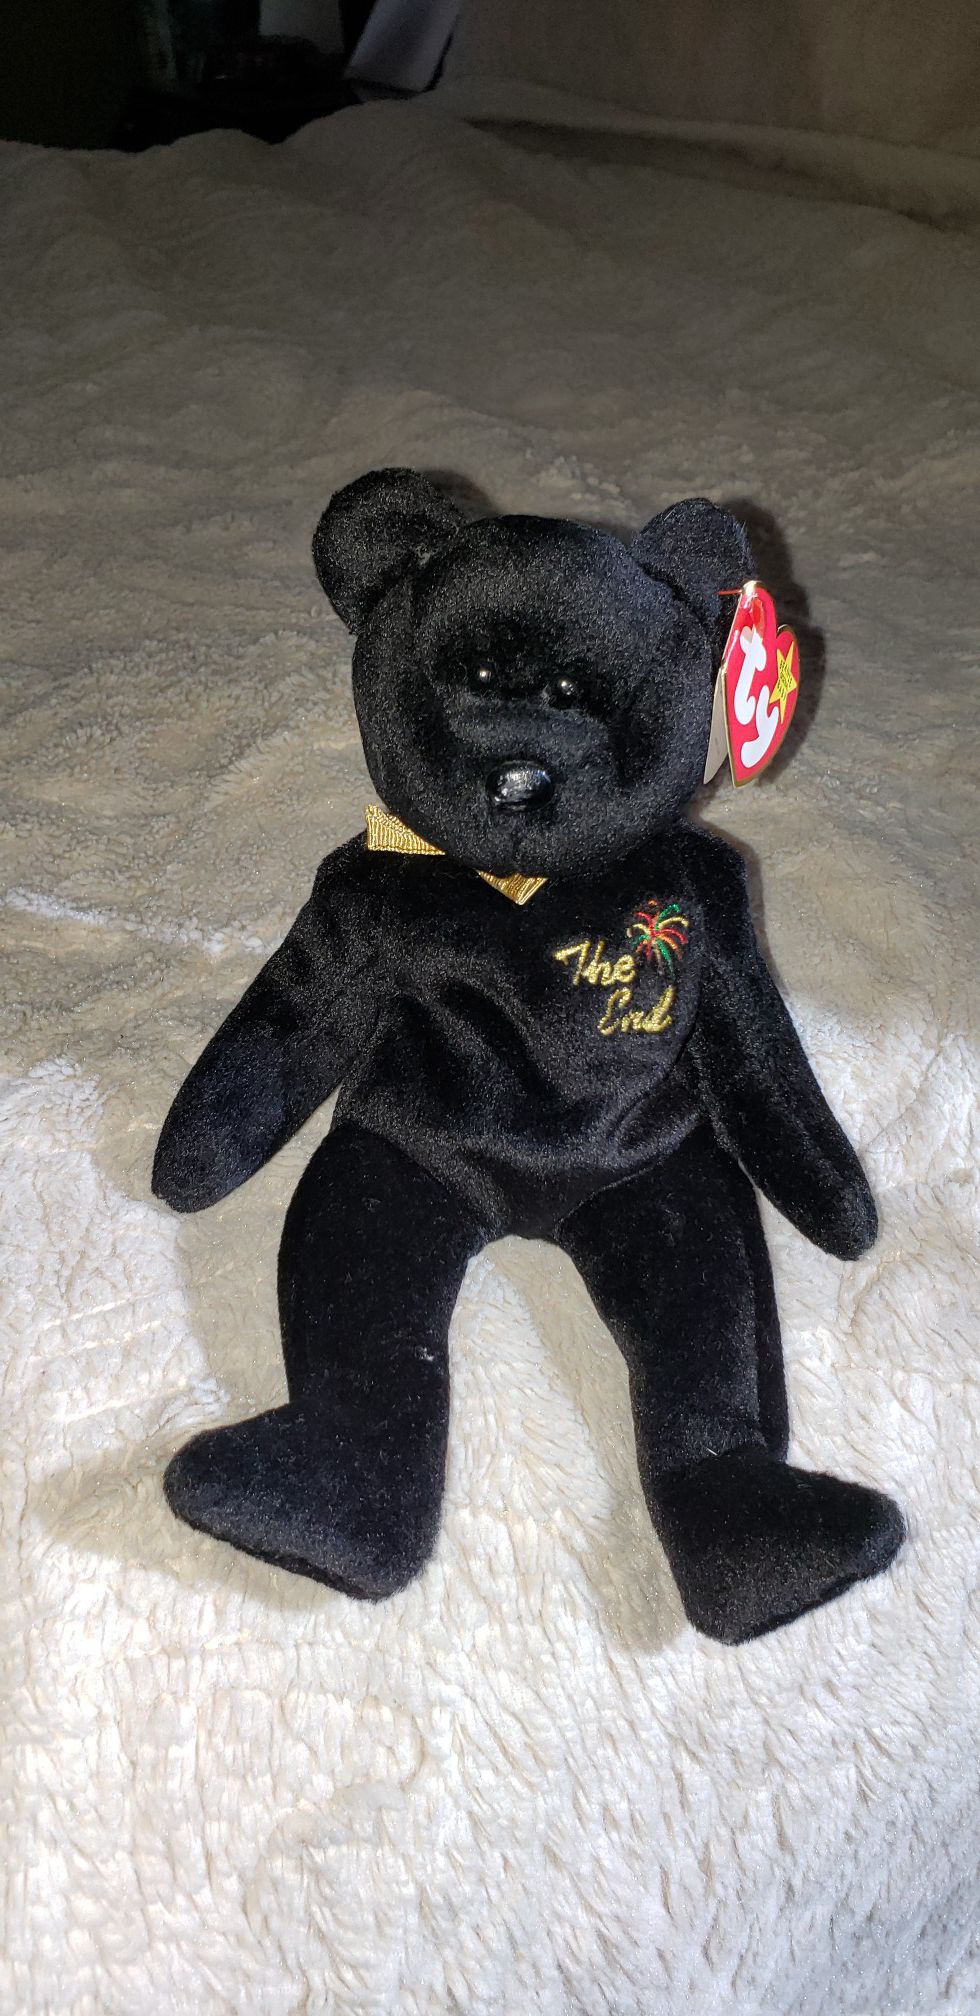 TY Beanie Baby....The End